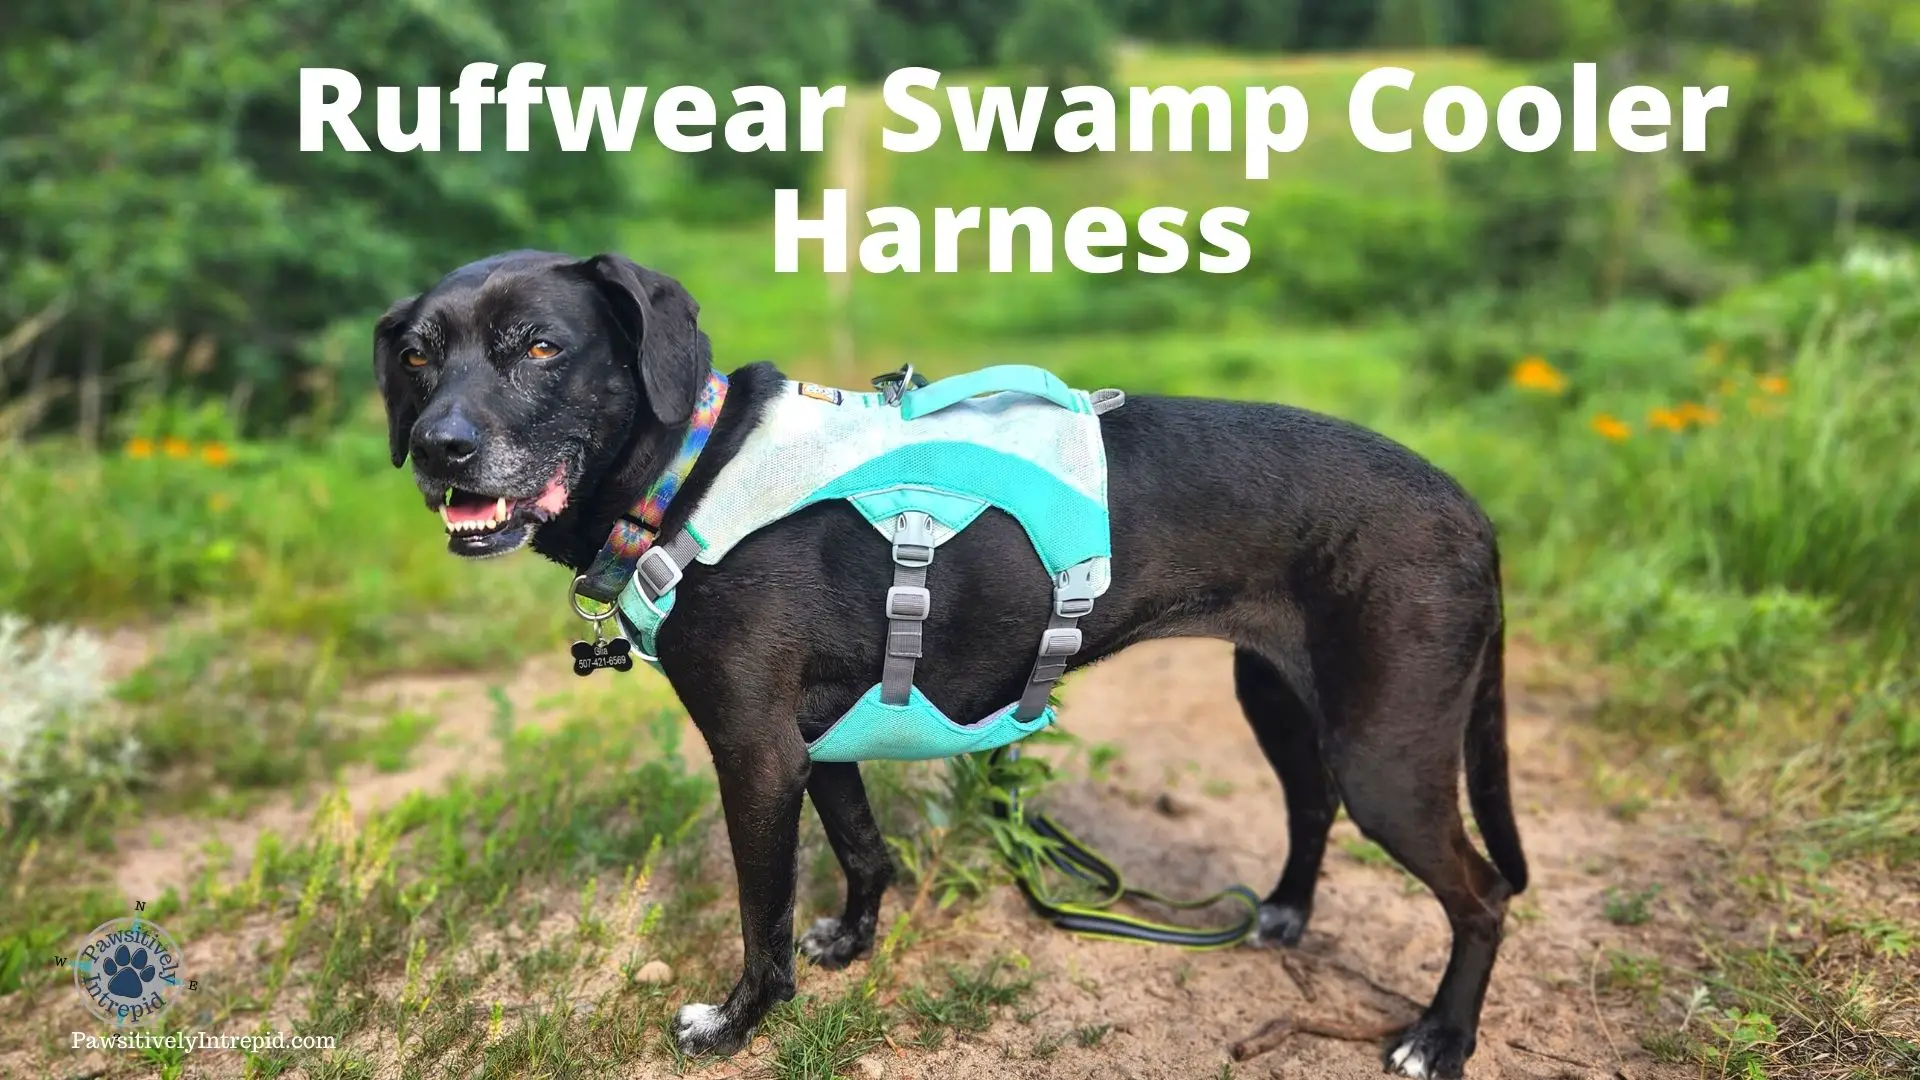 Compatible with Harnesses Swamp Cooler Evaporative Dog Cooling Vest RUFFWEAR 